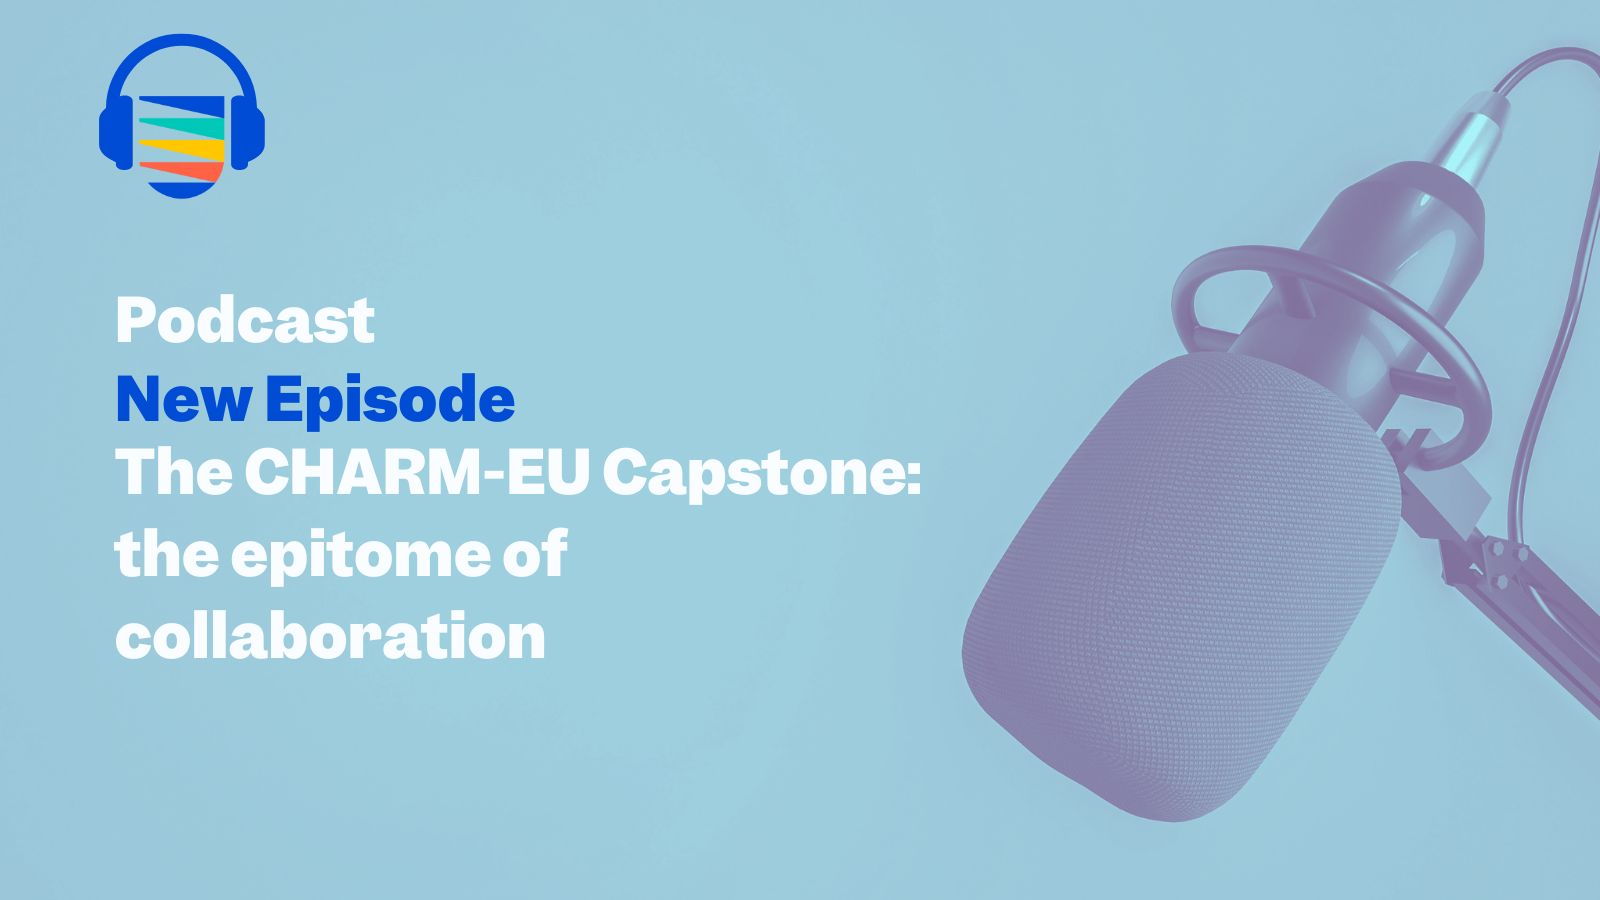 Text; Podcast new episode: The CHARM-EU Capstone: the epitome of collaboration. Image: light blue background, CHARM-EU logo with a headset in the top left corner, picture of a microphone on the right.